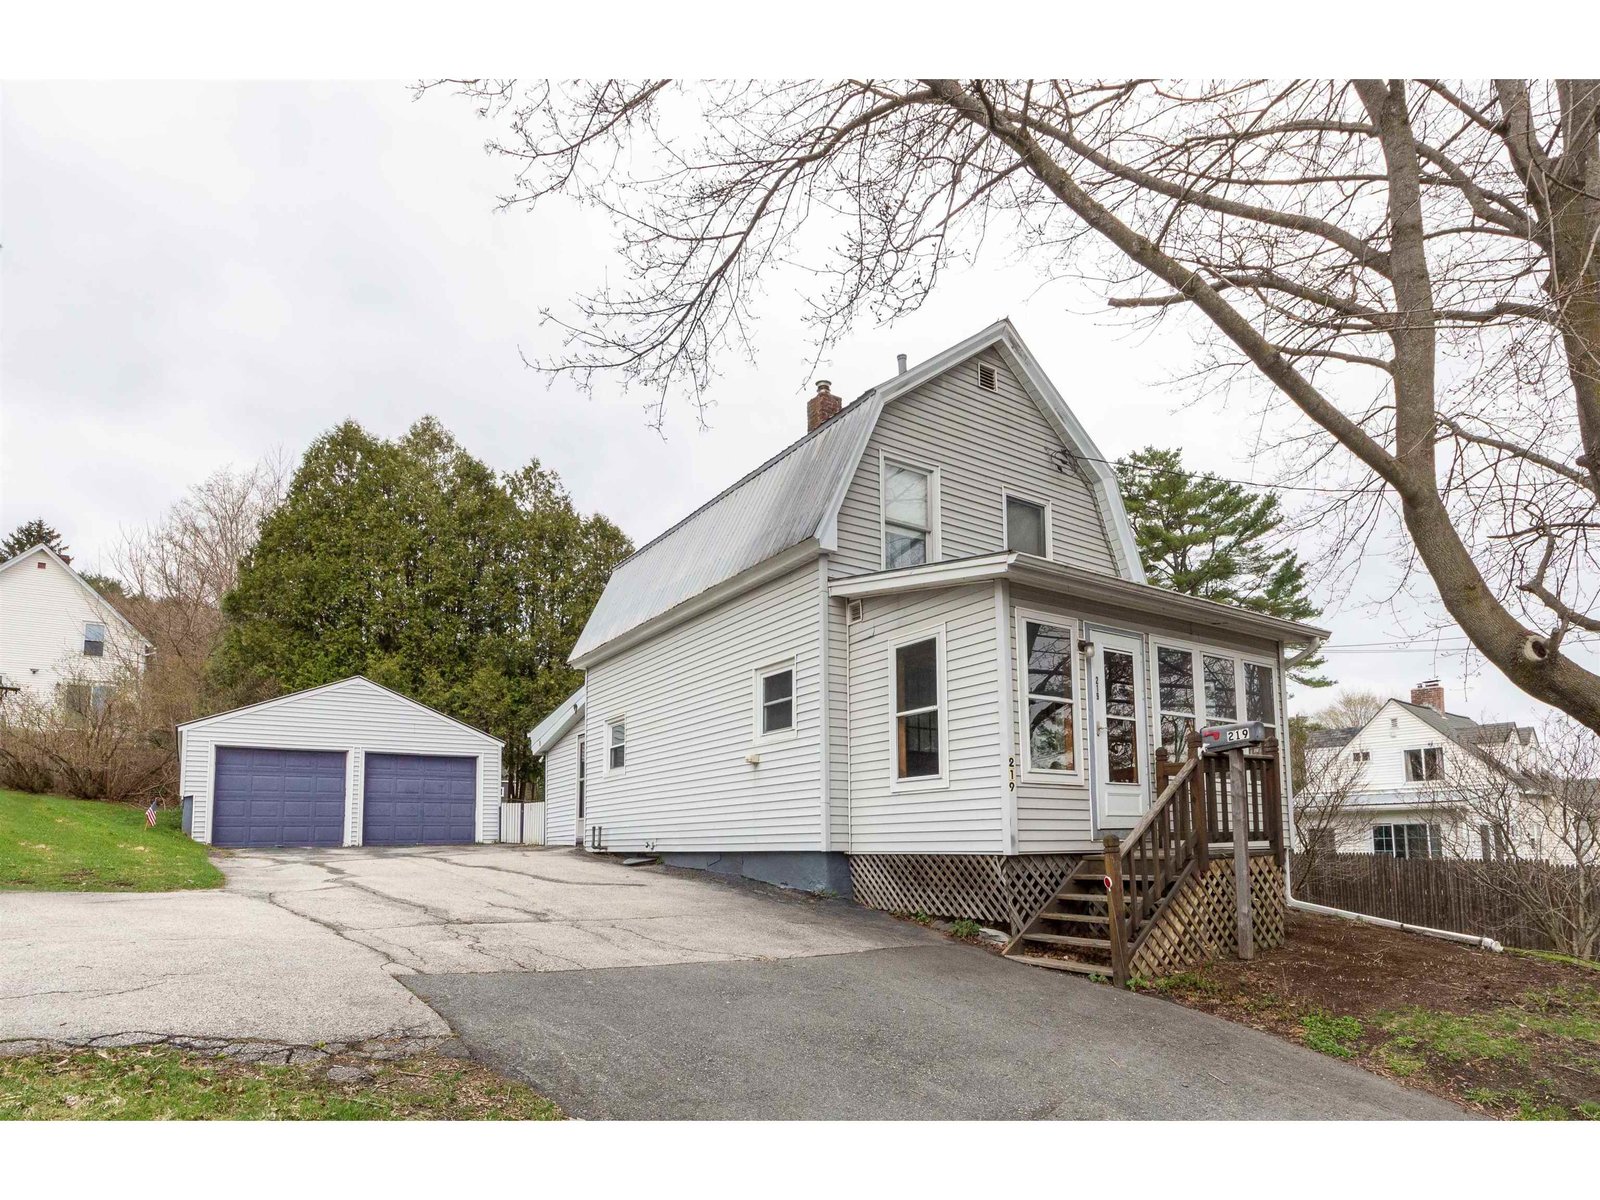 Sold property in Montpelier